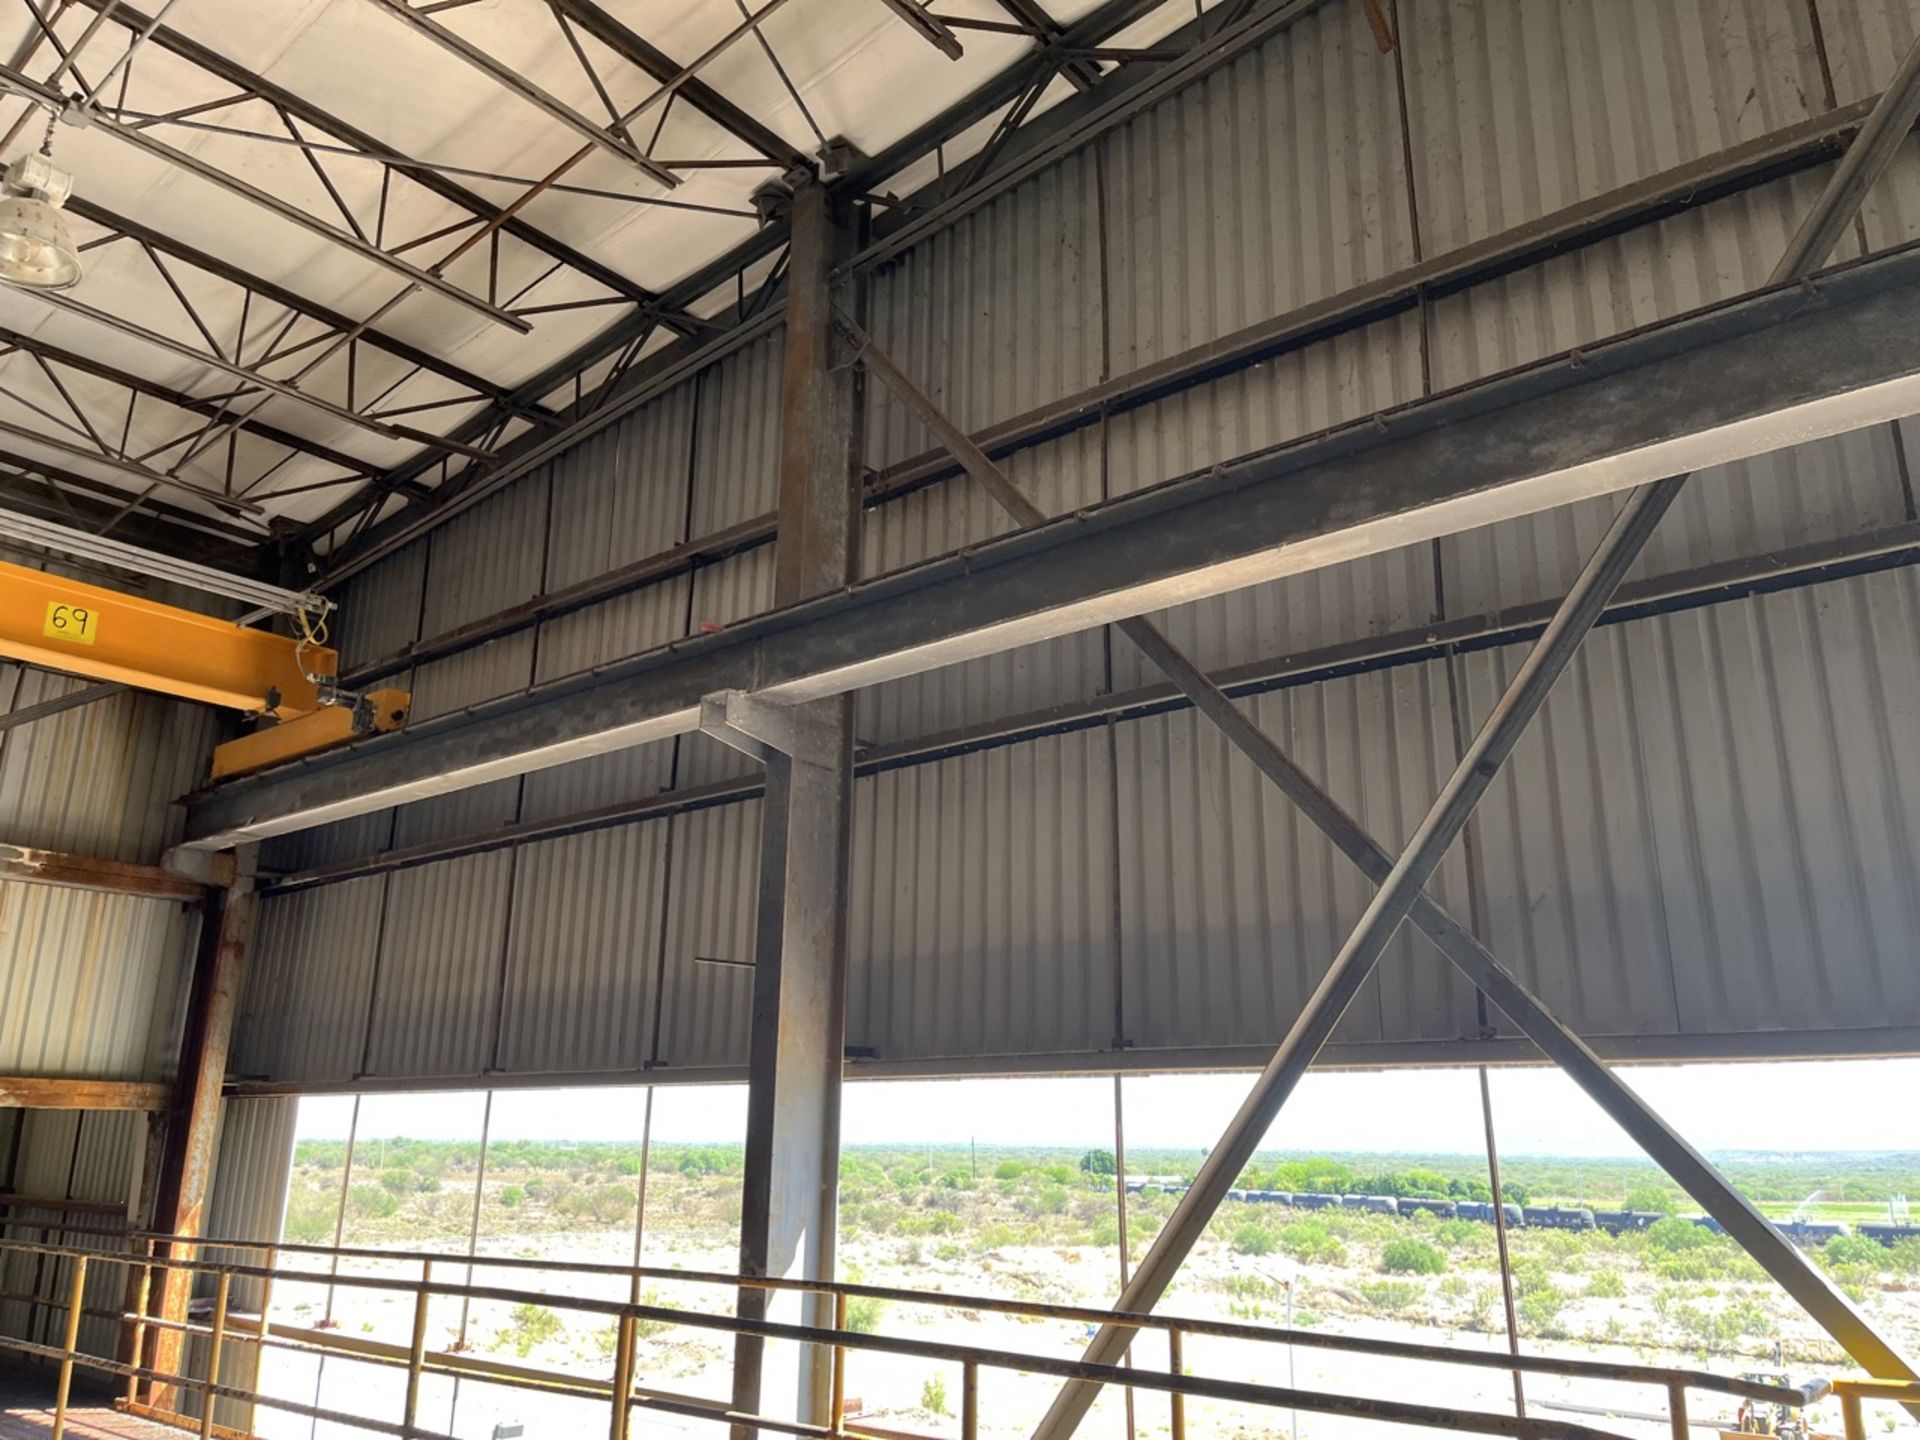 Konecranes overhead crane with a load capacity of 5 tons and a 15-meter lifting capacity; includes - Image 10 of 12